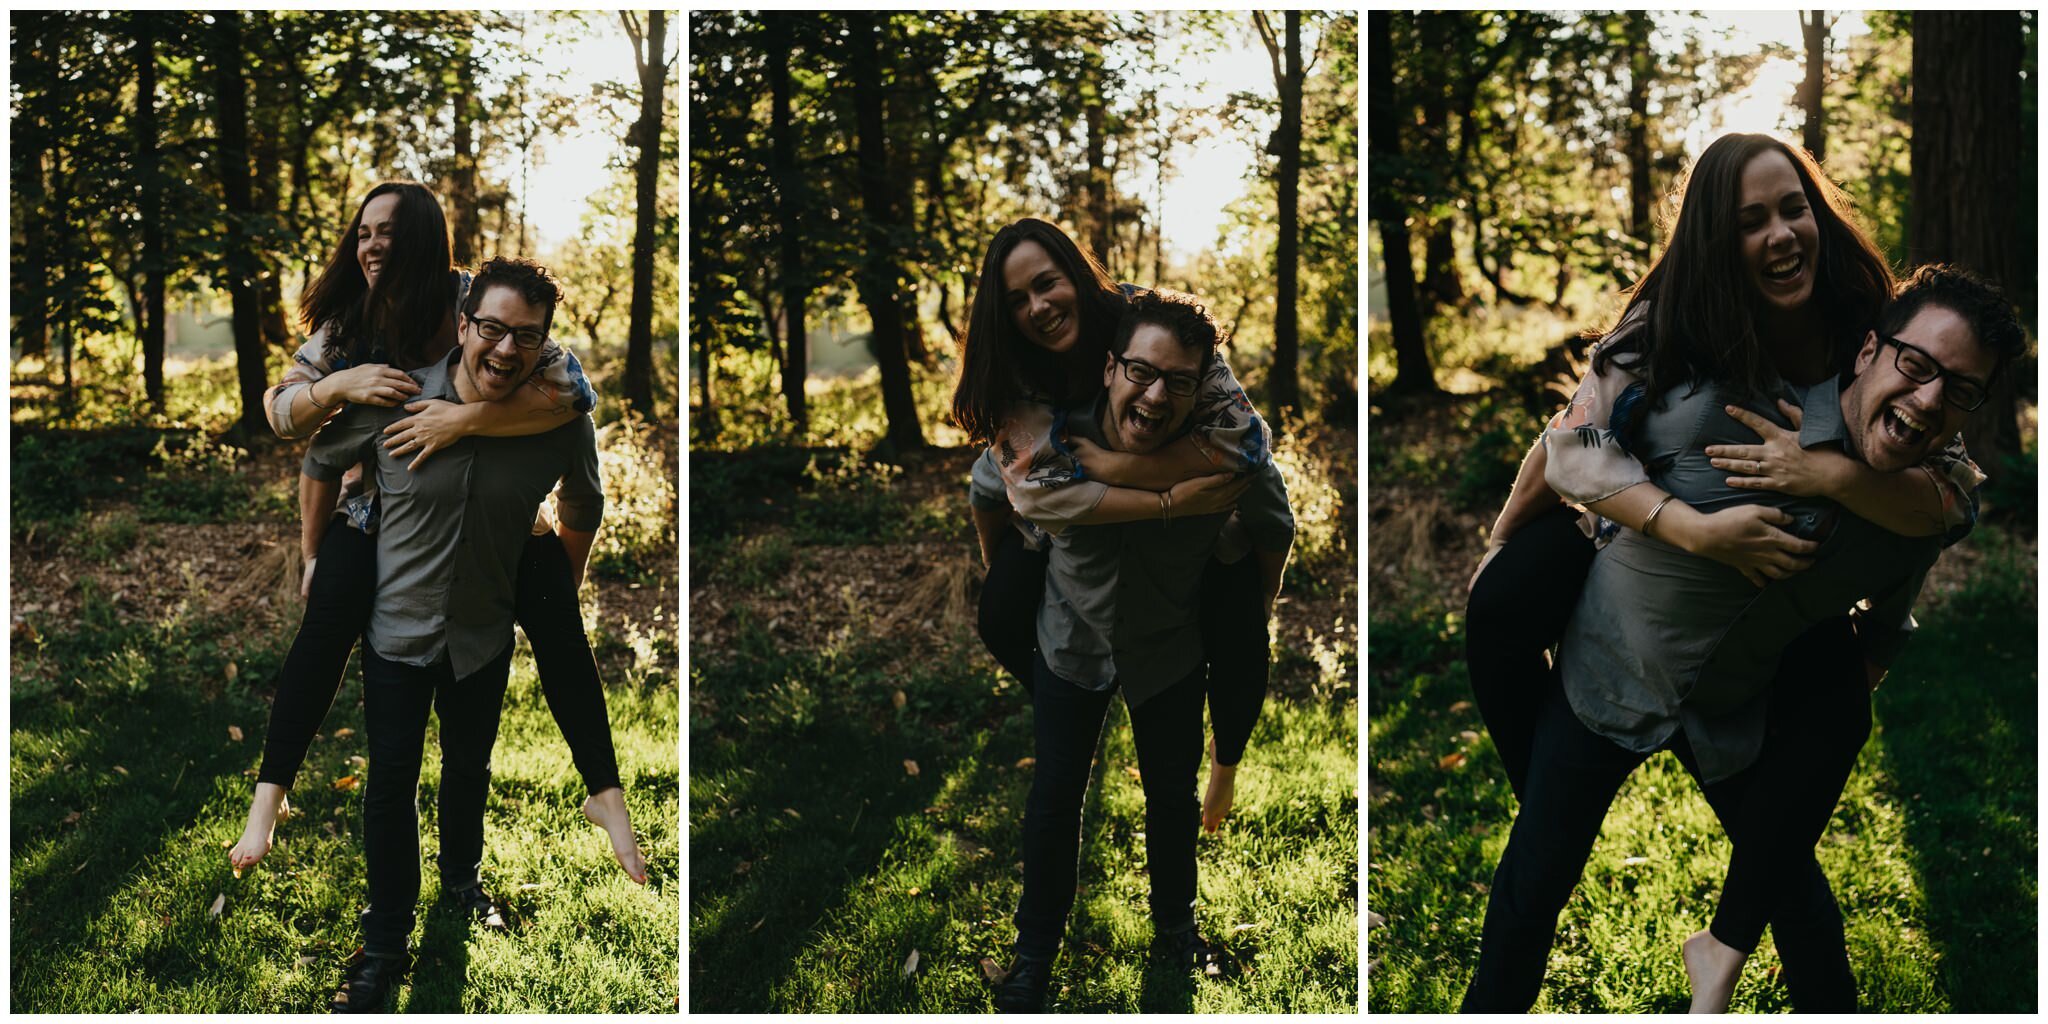 sunkissed-northacres-park-engagement-session-bethany-phil-14.jpg